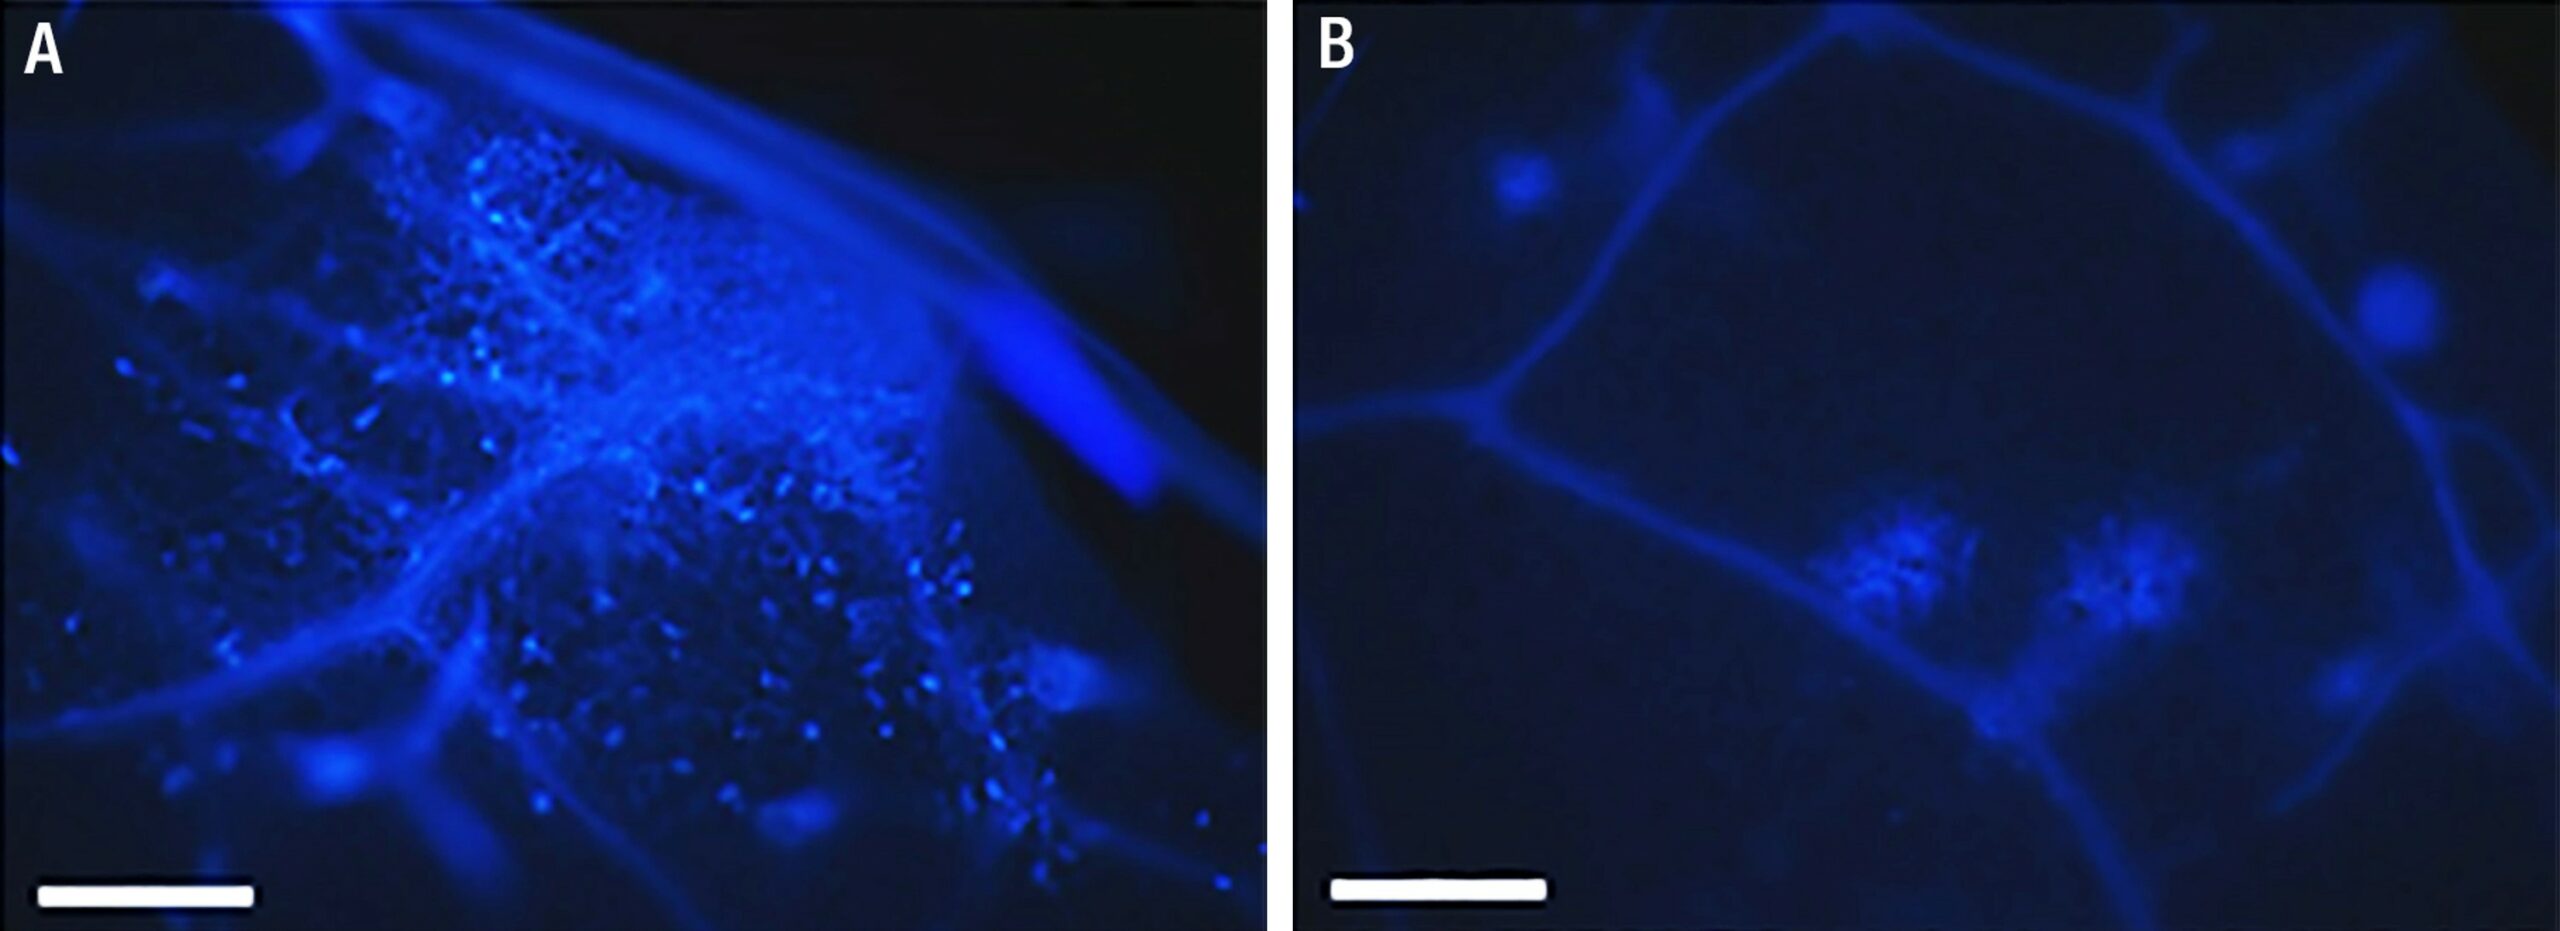 The damage caused by Heat Stress can be hard to see, here in Image A (L) there is a strong fluorescent glow in the plants cells that have suffered heat stress indicating high cell damage, while in Image B (R) the same crop, under same heat conditions, but previously treated with a Rovensa Next biostimulant shows very little fluorescence indicating a vast reduction in the cell damage that results from Abiotic Stress related heat damage © Rovensa Next 